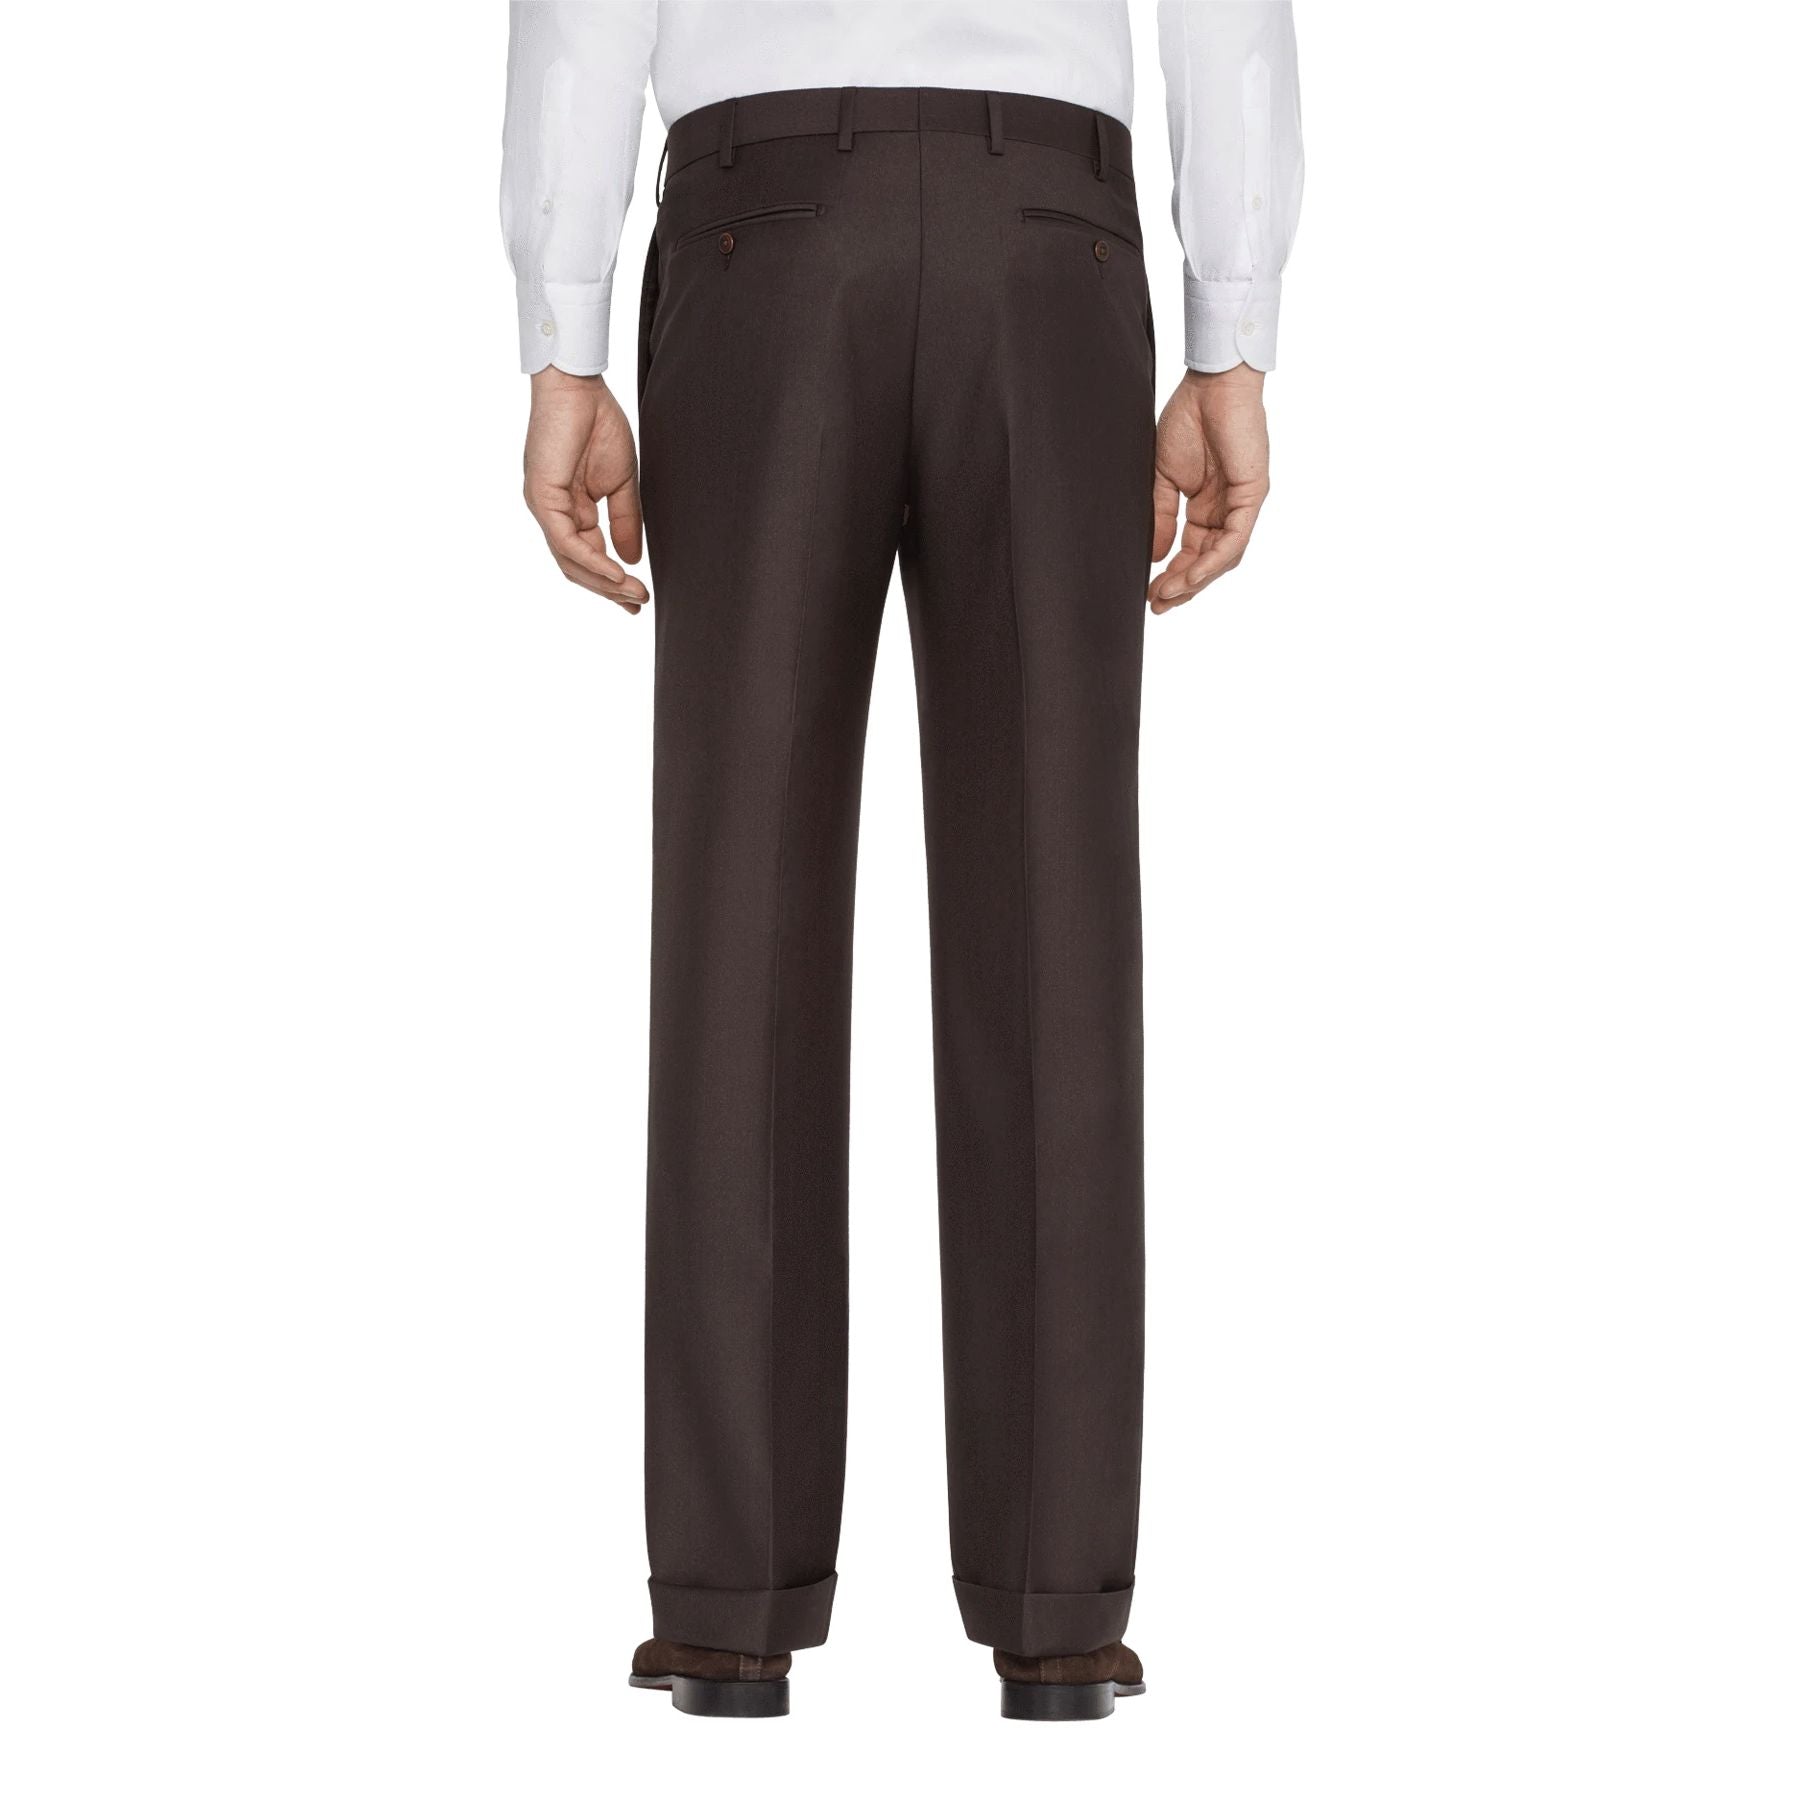 Todd Flat Front Super 120s Wool Serge Trouser in Chocolate Brown (Full Fit) by Zanella